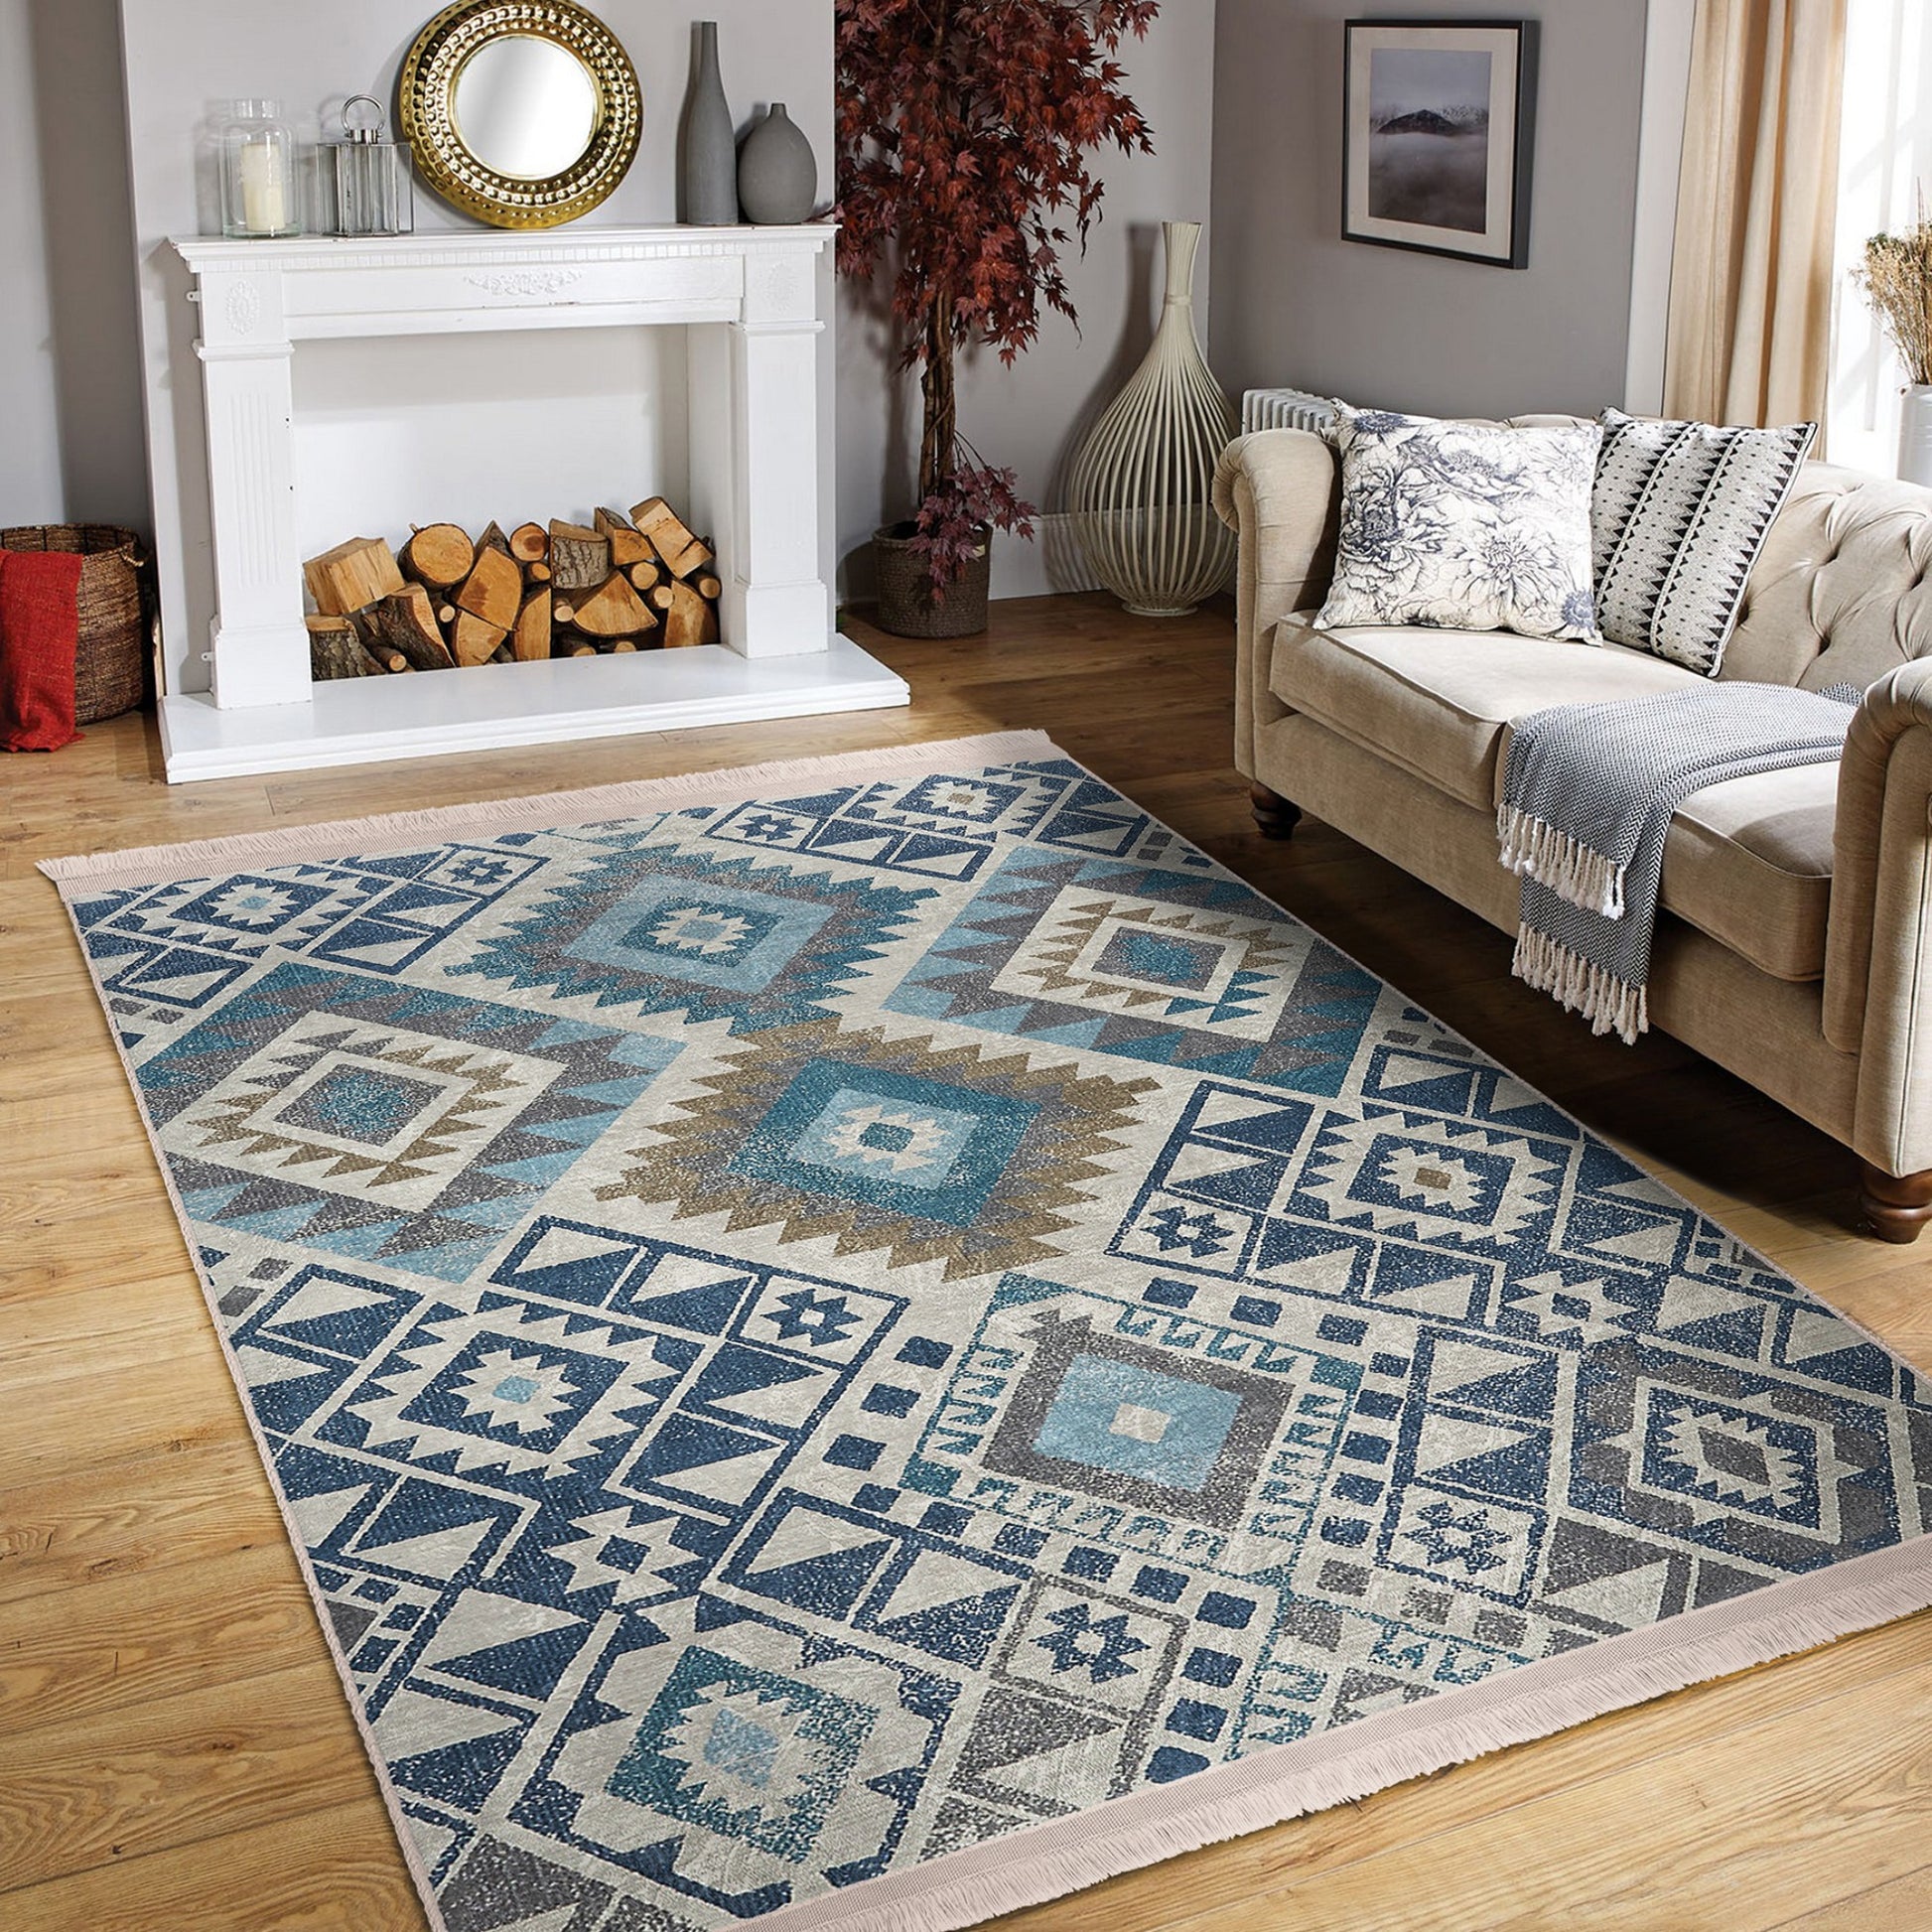 Elegant Rug with Cultural Heritage for Home Decor